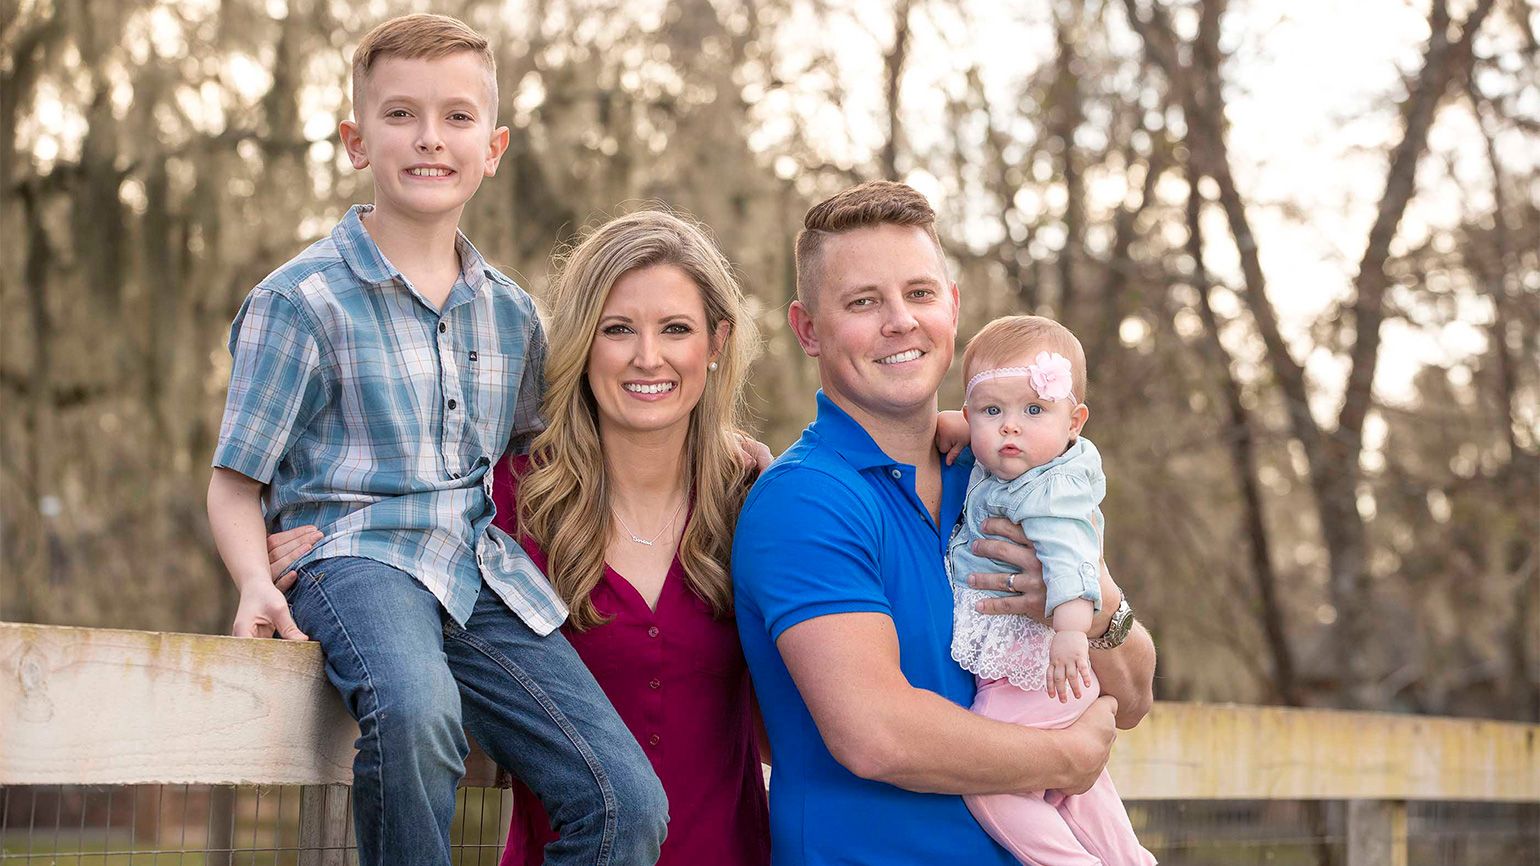 Rebekah with her family: son Noah, husband Chris and daughter Ryleigh.